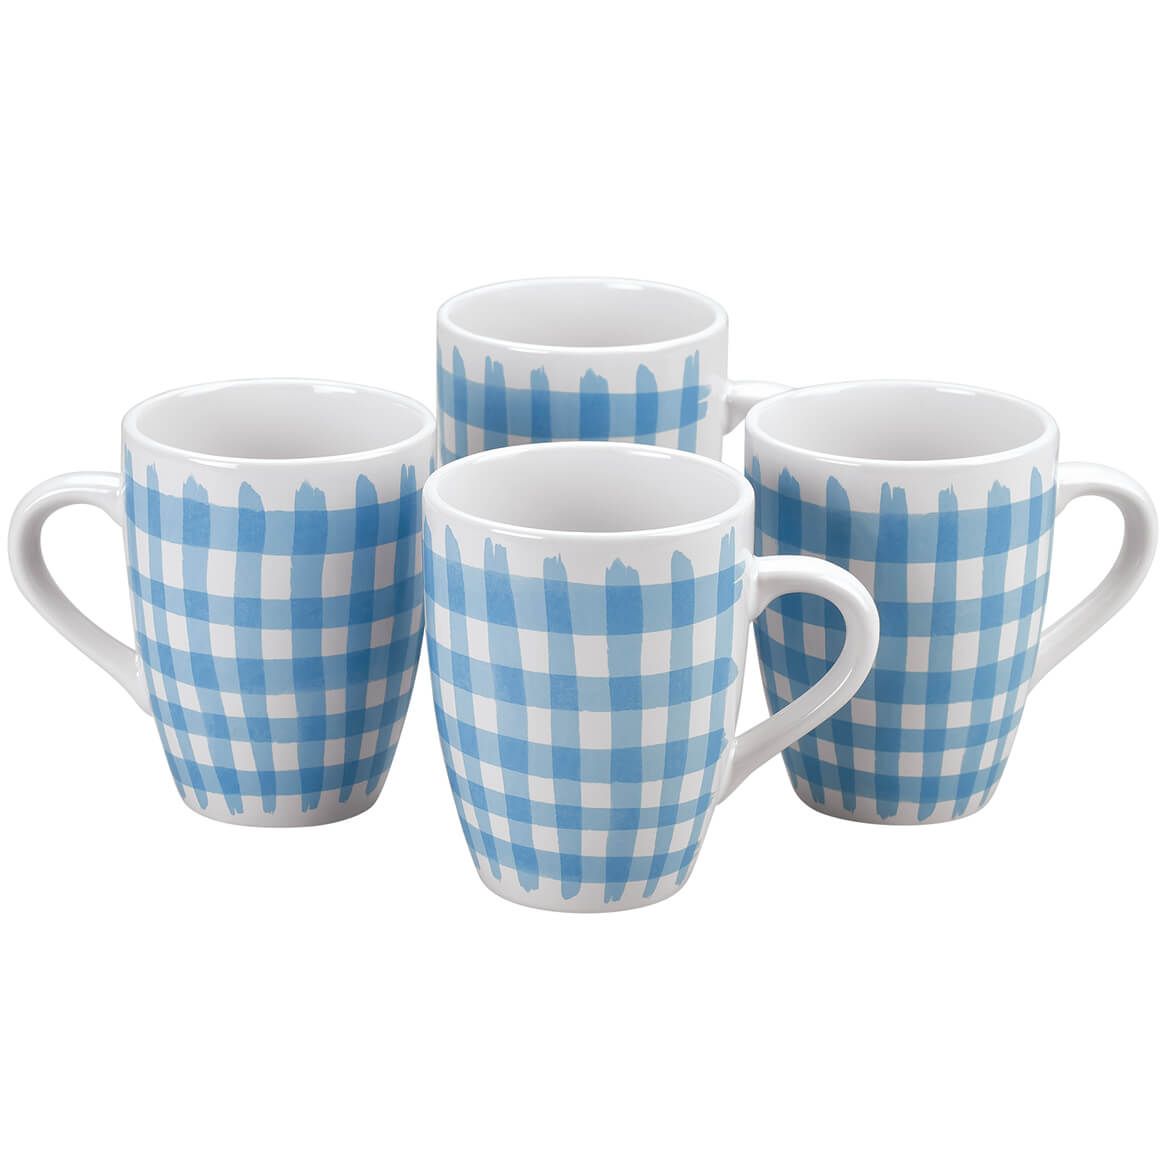 Blue Gingham Mugs, Set of 4 by William Roberts + '-' + 369198